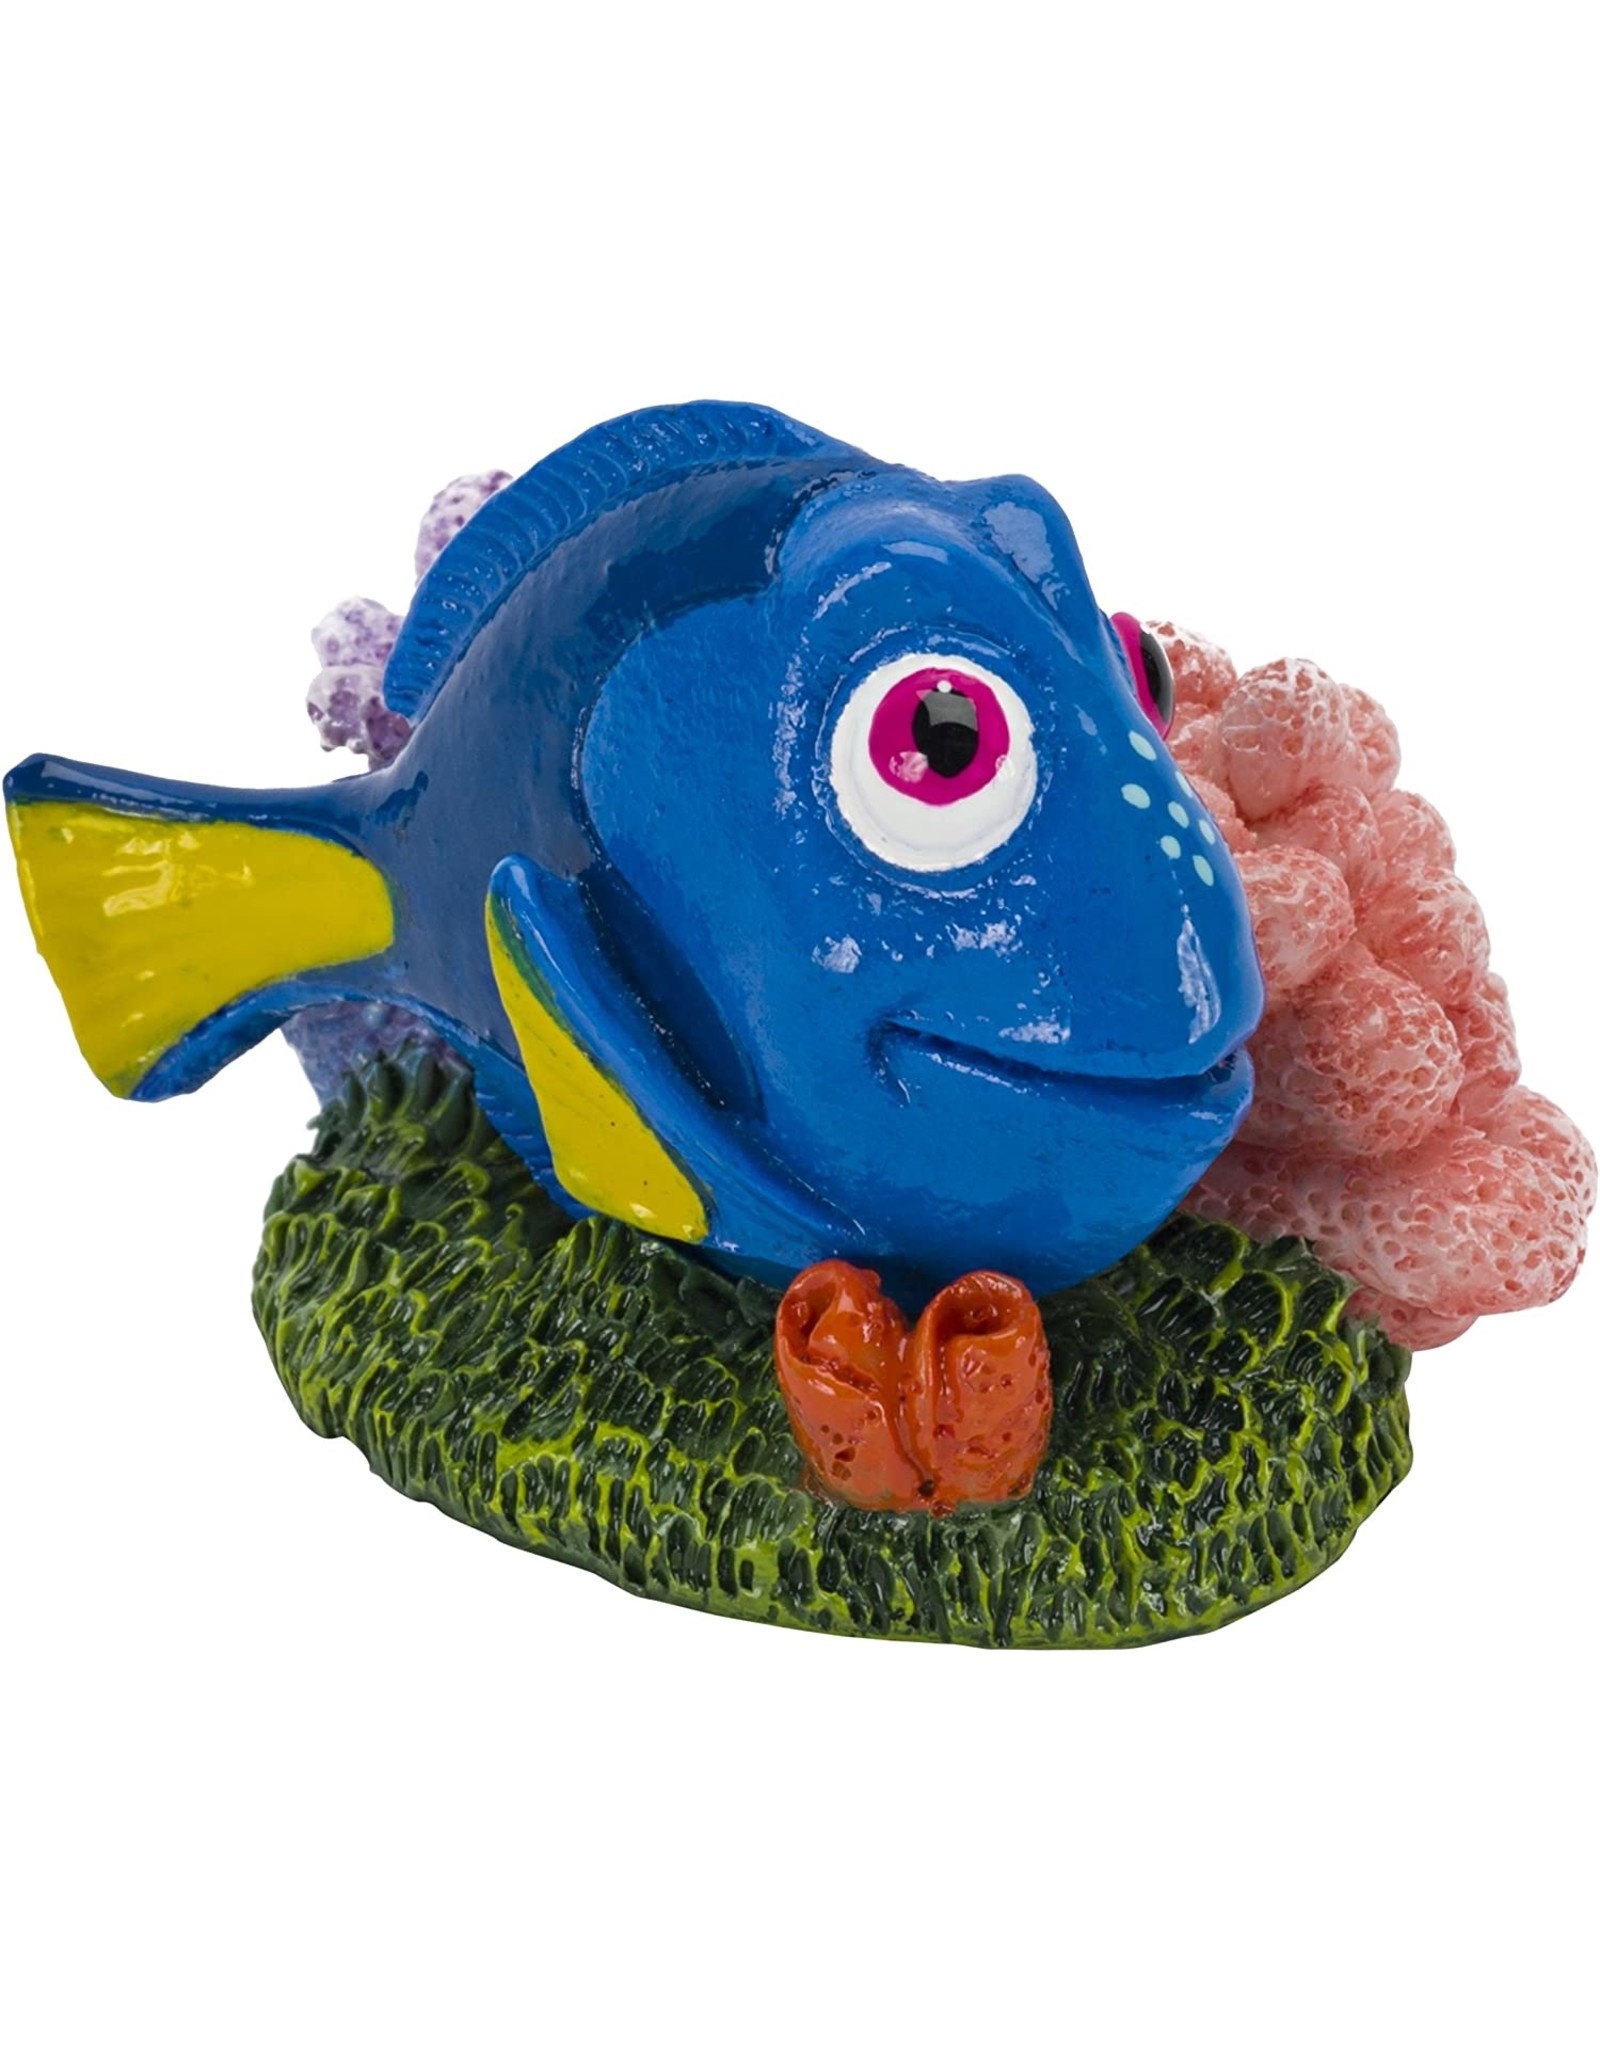 Penn Plax 64674 Finding Dory with Coral Mini